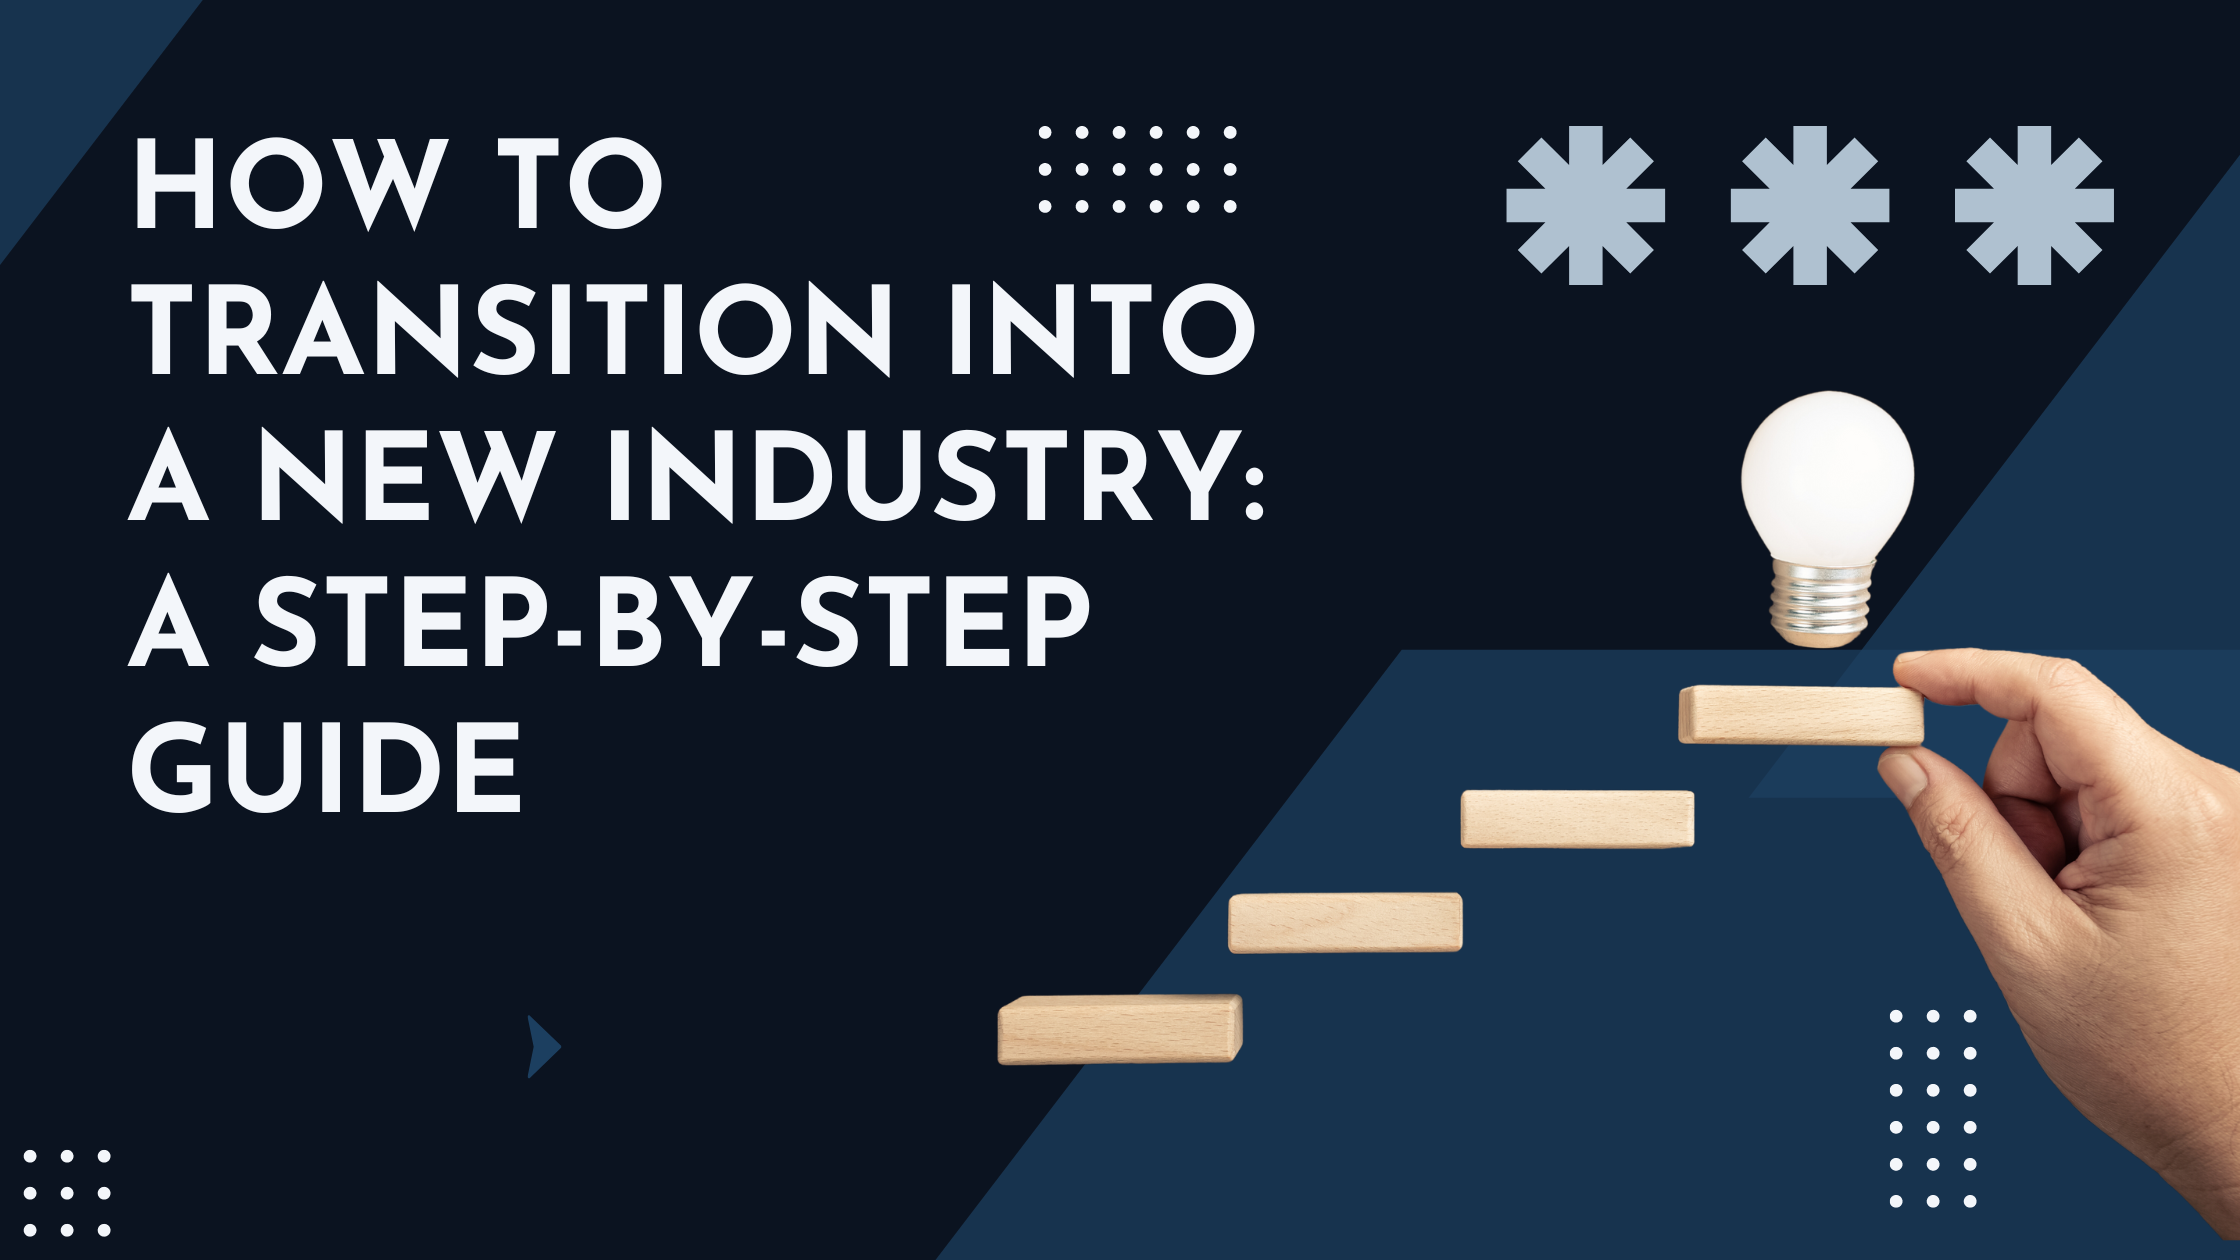 How to Transition into a New Industry: A Step-by-Step Guide